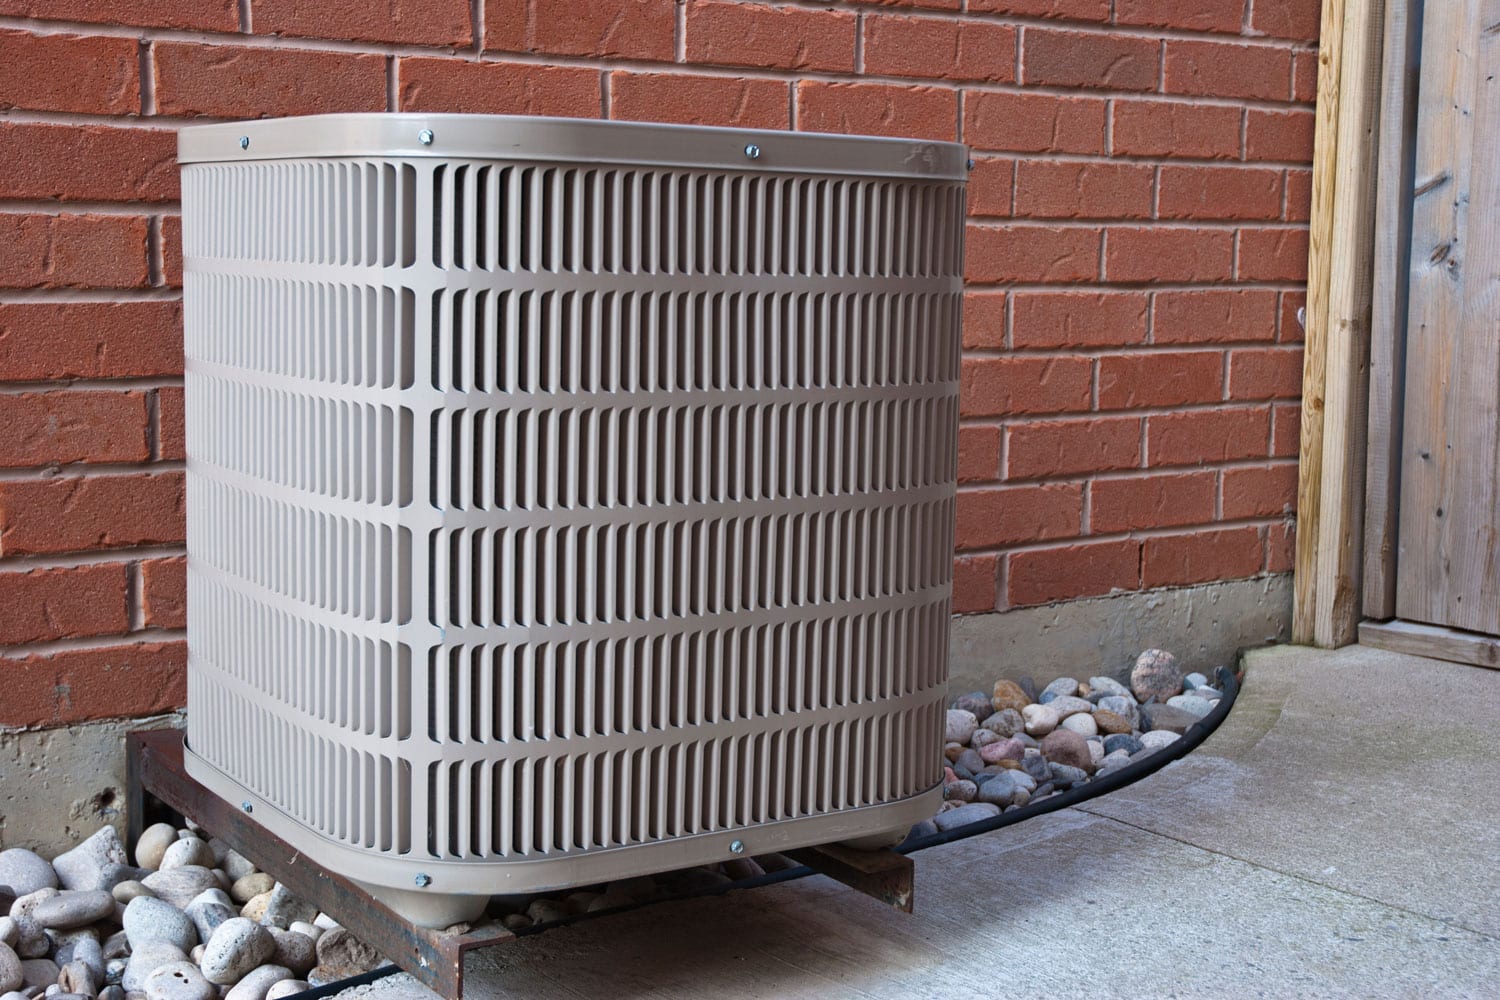 A small high powered air conditioning unit mounted on a metal stand